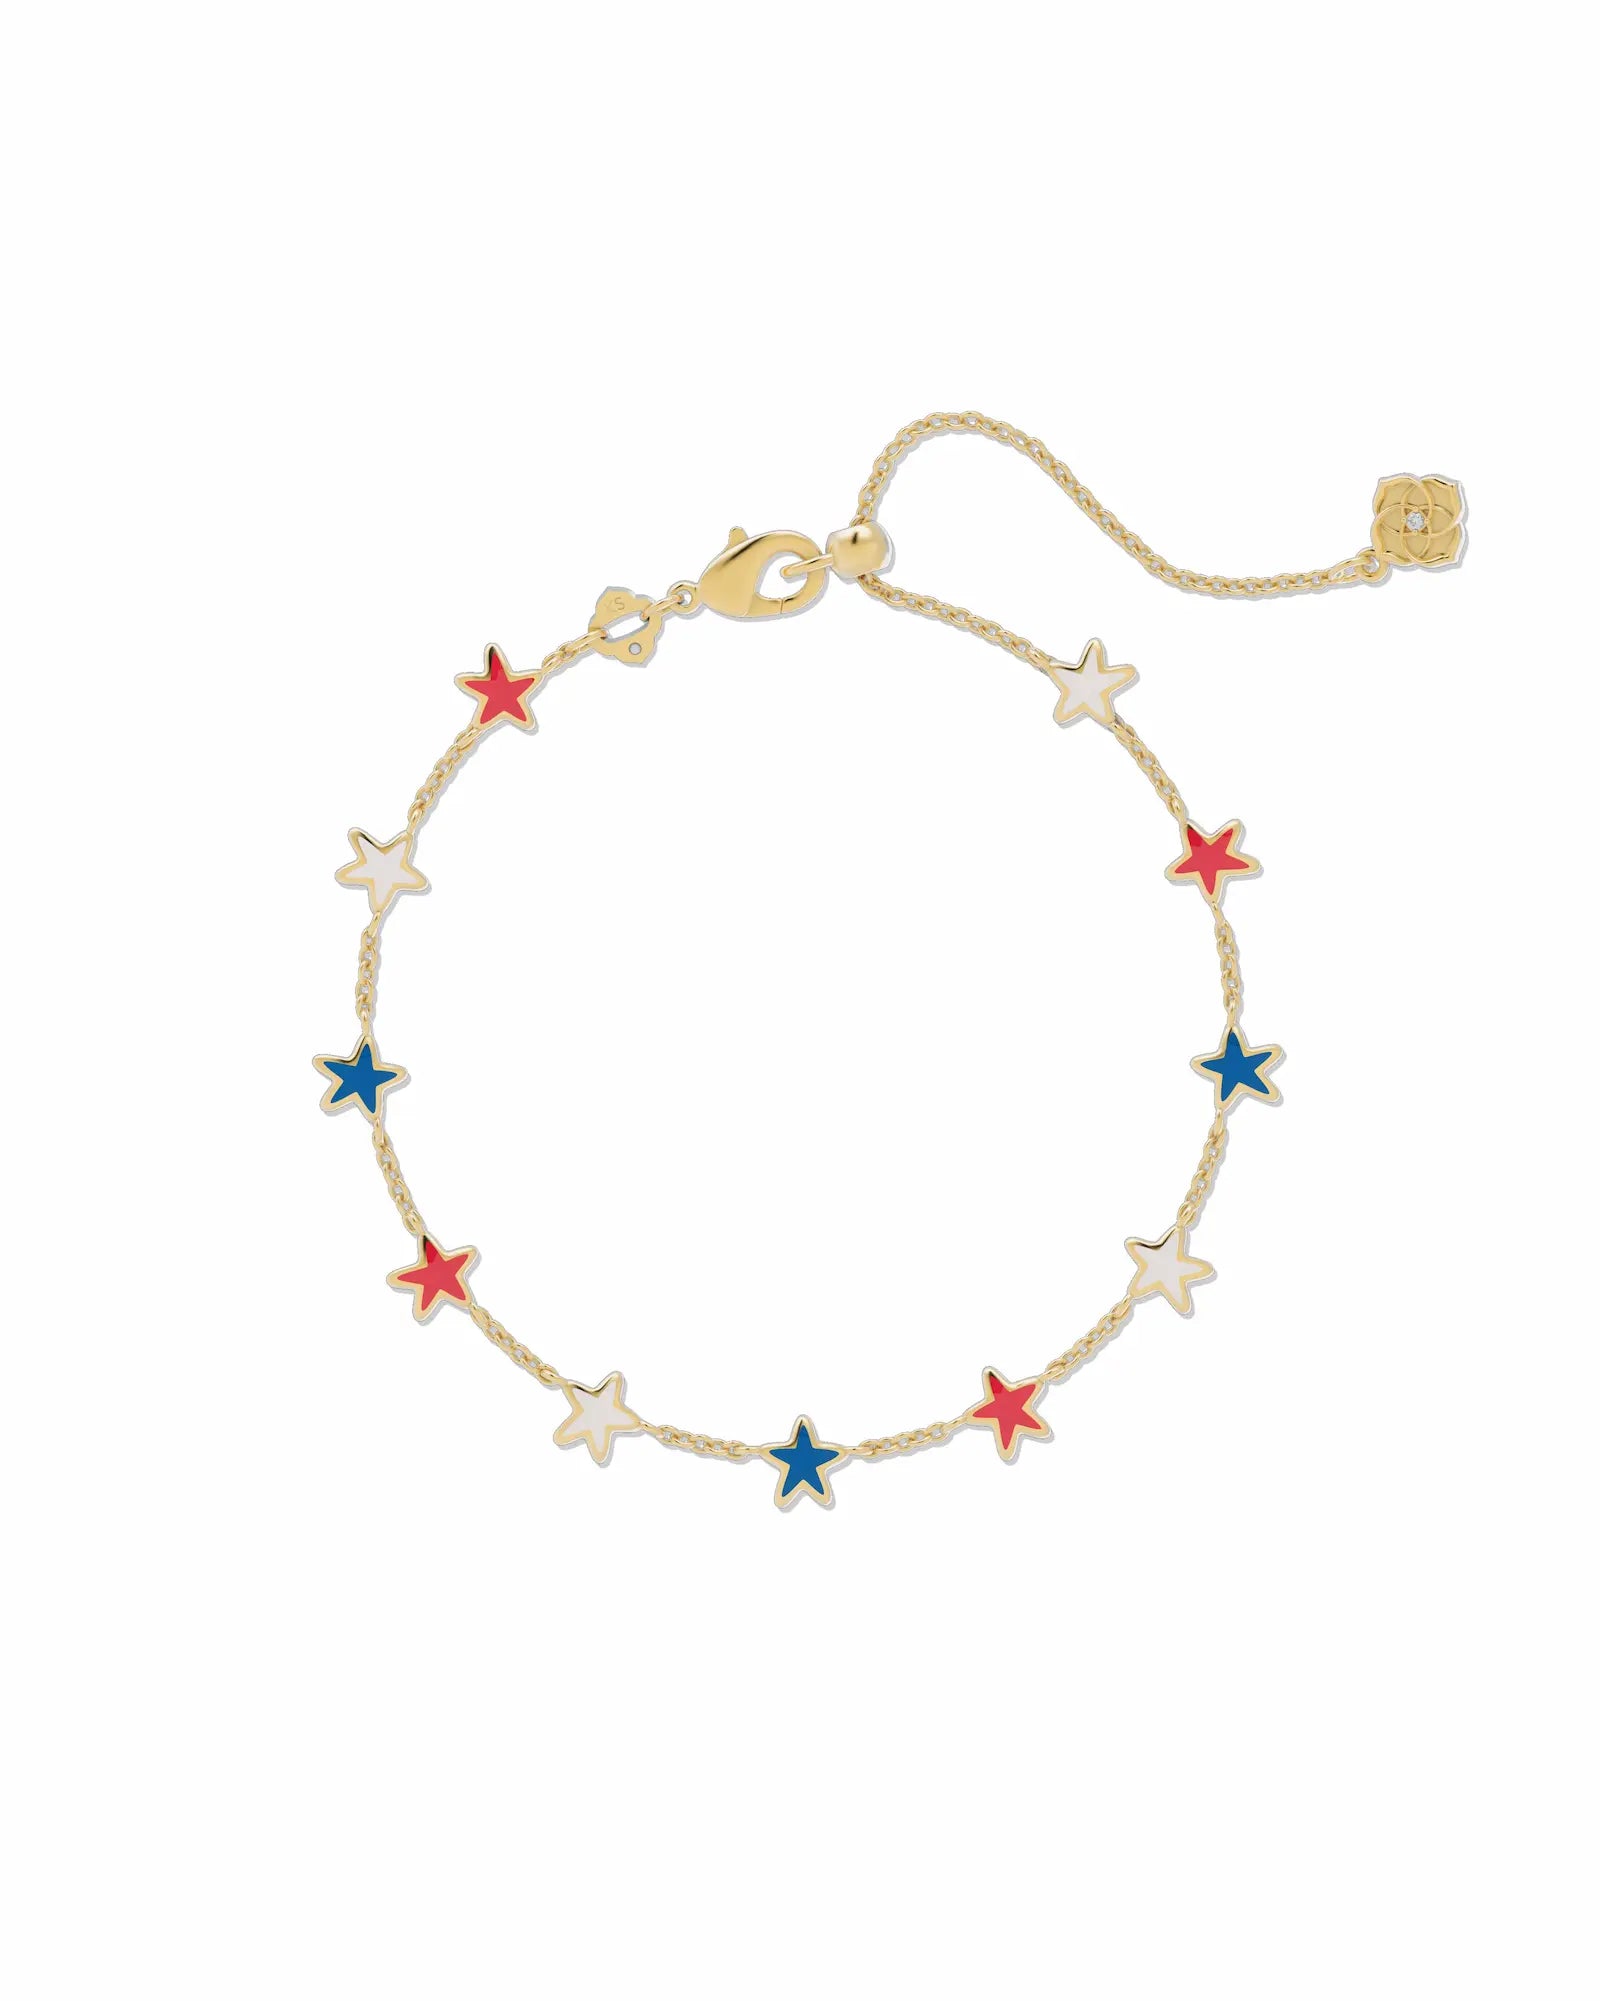 Sierra Star Delicate Chain Bracelet in Gold, with Red, White, and Blue starts. From Kendra Scott.